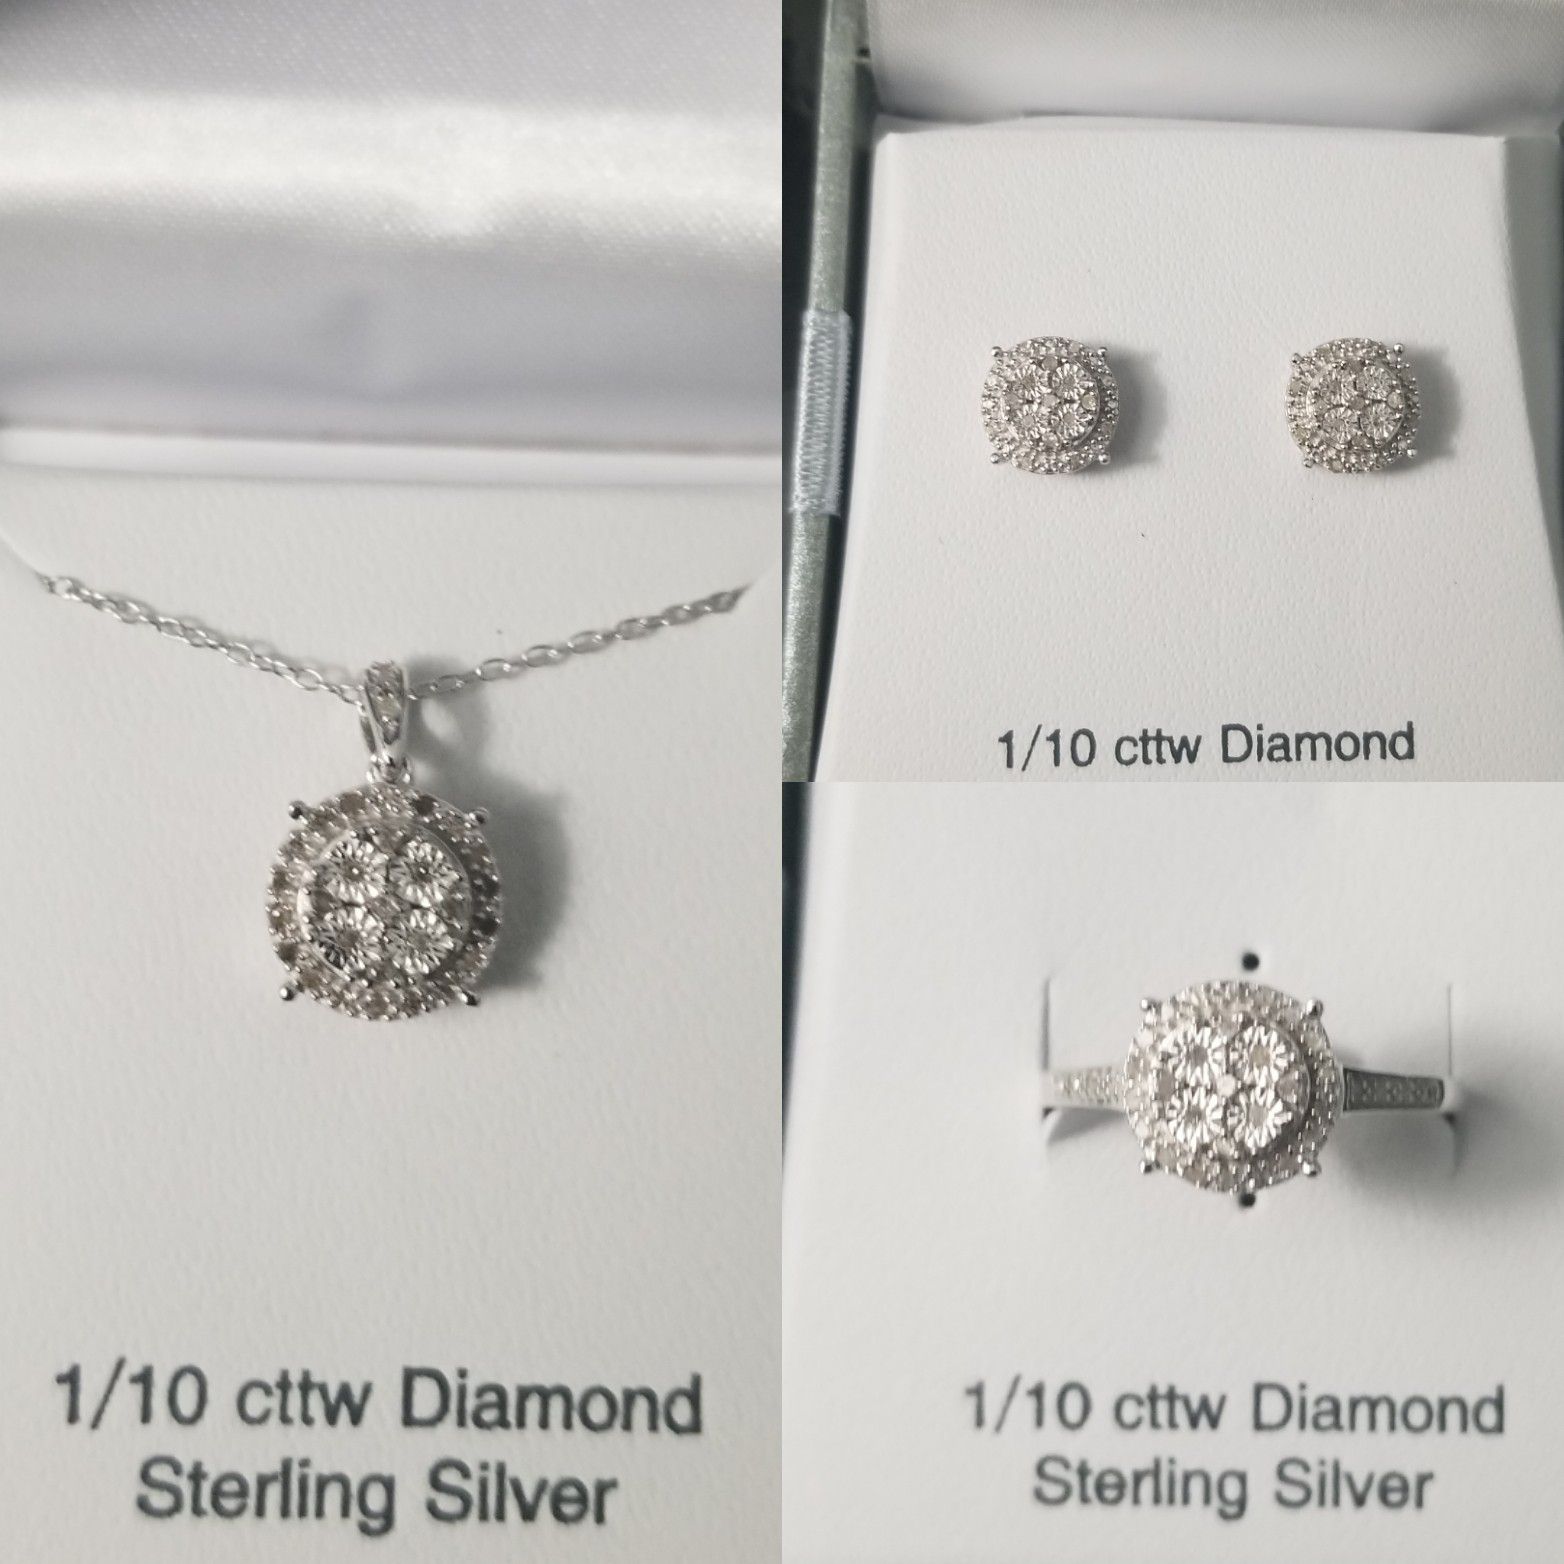 ❤SALE 🎆SALE 💗SALE❣ Real Diamond Ring Earring Necklace Set